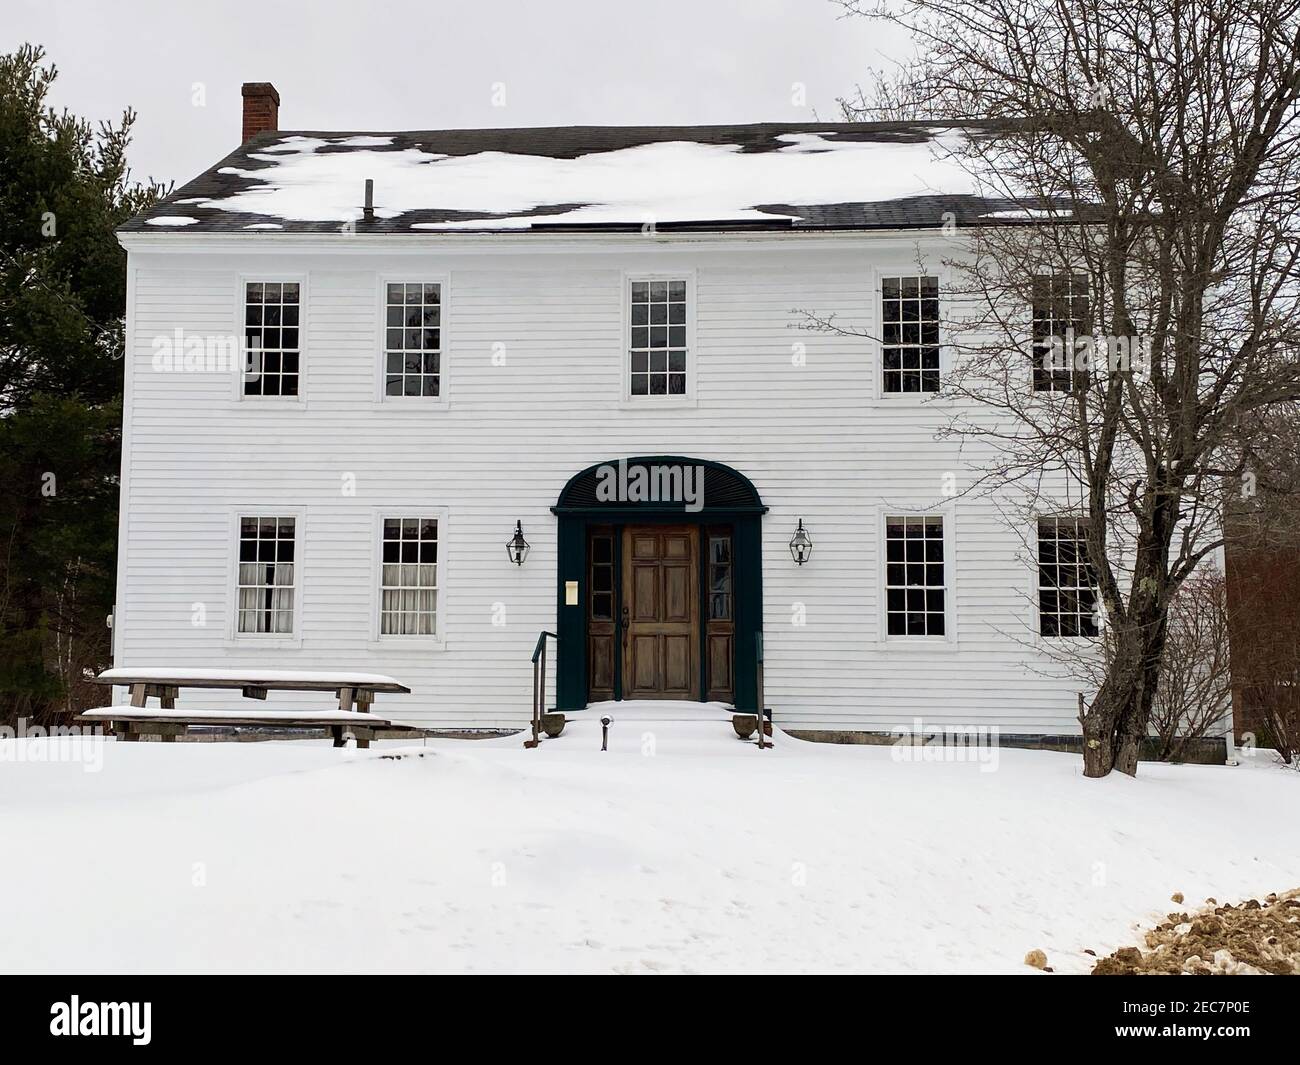 This photo of the Nathaniel Hawthorne Home in Raymond, Maine, was taken in February 2021. The historic house, pictured above, was built in around 1812 and is located in Southern Maine near Sebago Lake. It was occupied by the famous American writer, Nathaniel Hawthorne, from 1812 through around 1825. Some accounts attribute as little as one year of residence at this house, while others ascribe several years. The years 1821-1825 were Hawthorne’s years at Bowdoin College, and the Association assumes he remained connected to the house in Raymond during this time. The span of 1812-1825 describes th Stock Photo